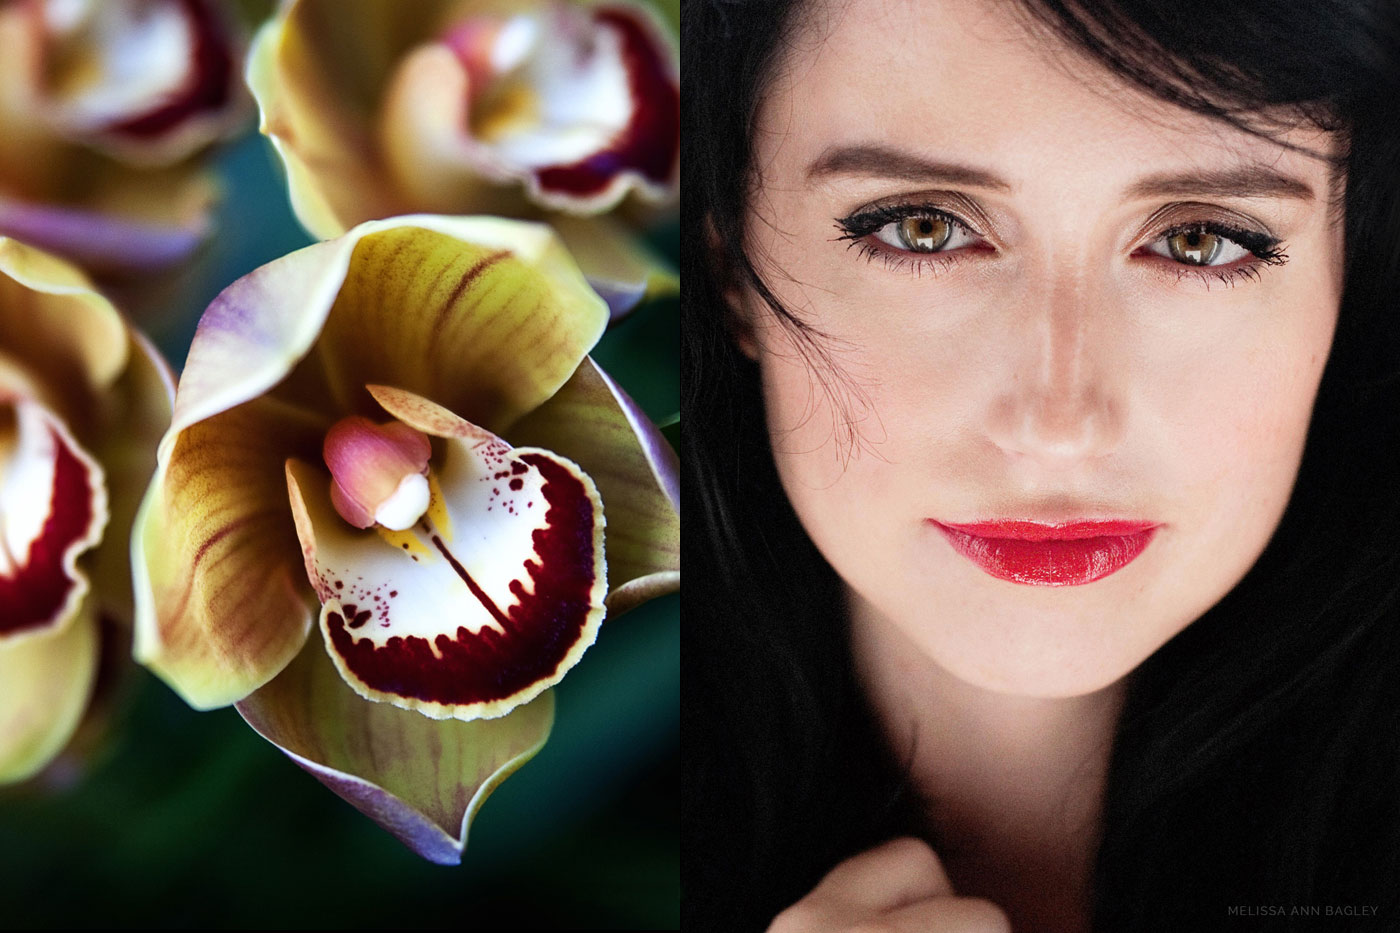 Close up photo of a yellow and red orchid next to a close up portrait of a woman with dark hair and hazel eyes wearing a dark coat and pink lipstick.